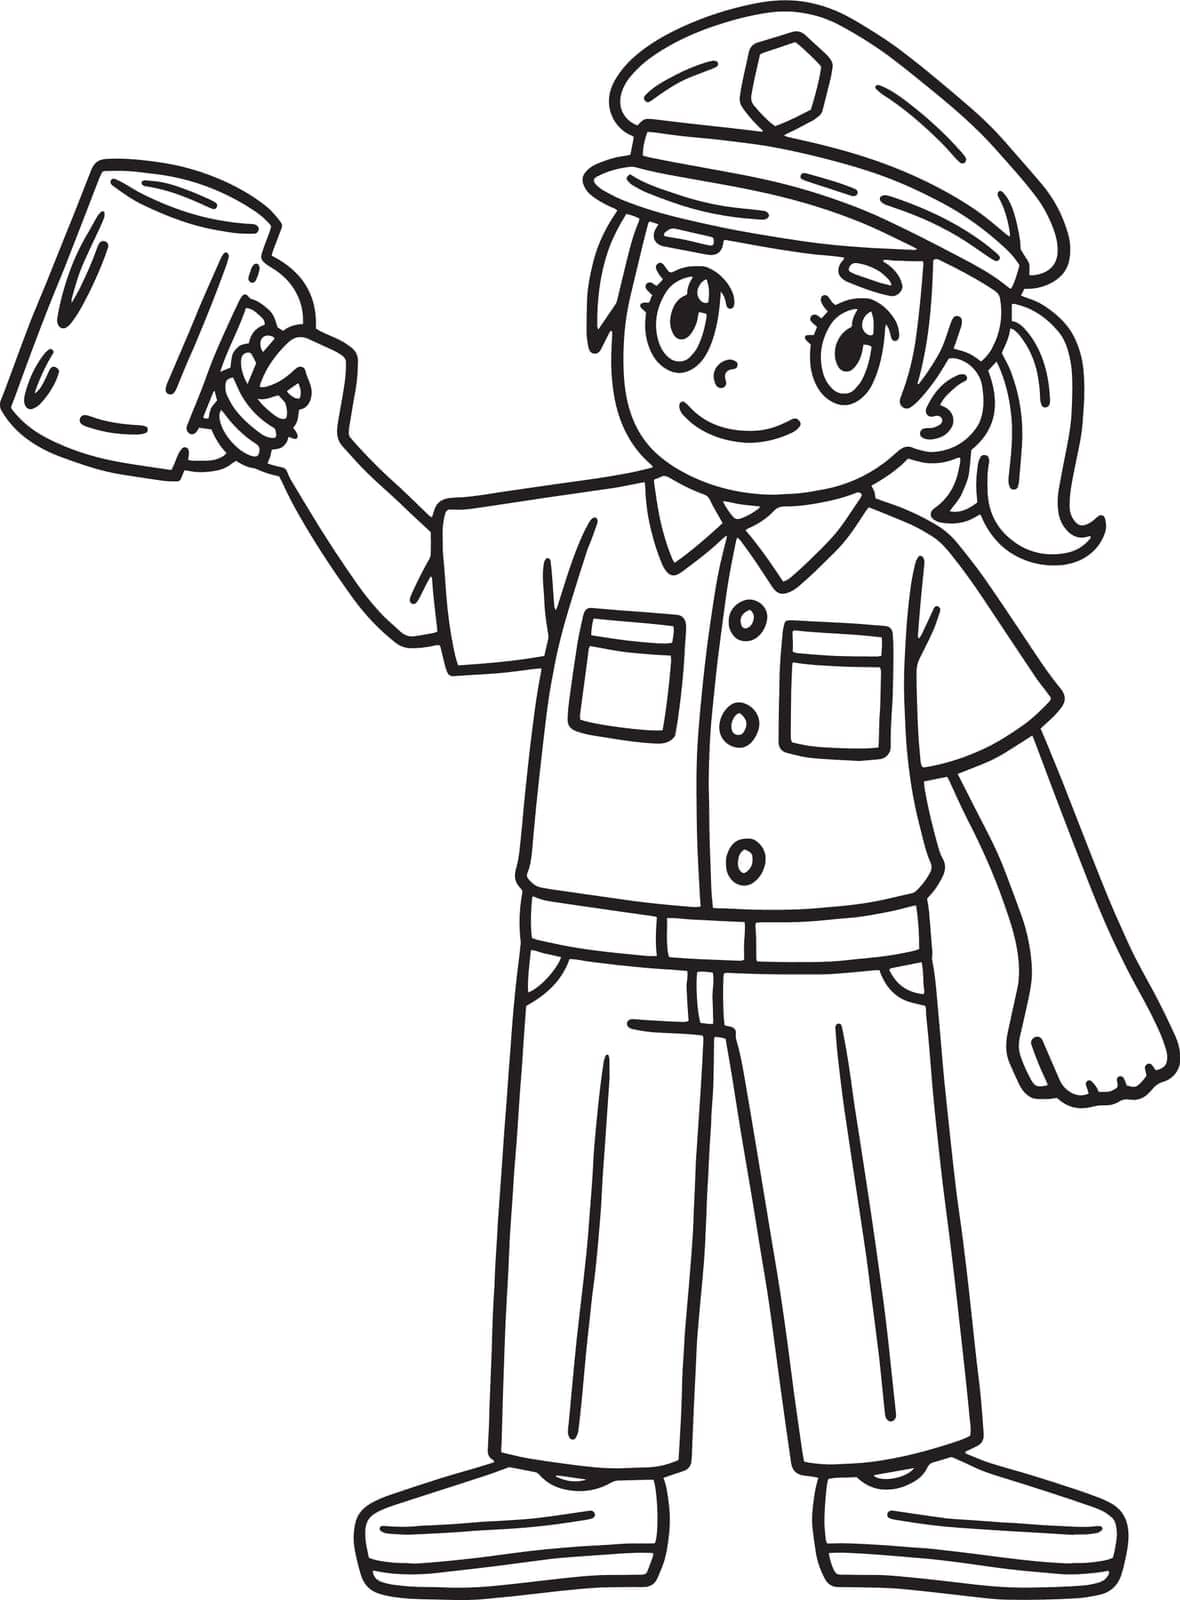 Policewoman Holding Mug Isolated Coloring Page by abbydesign